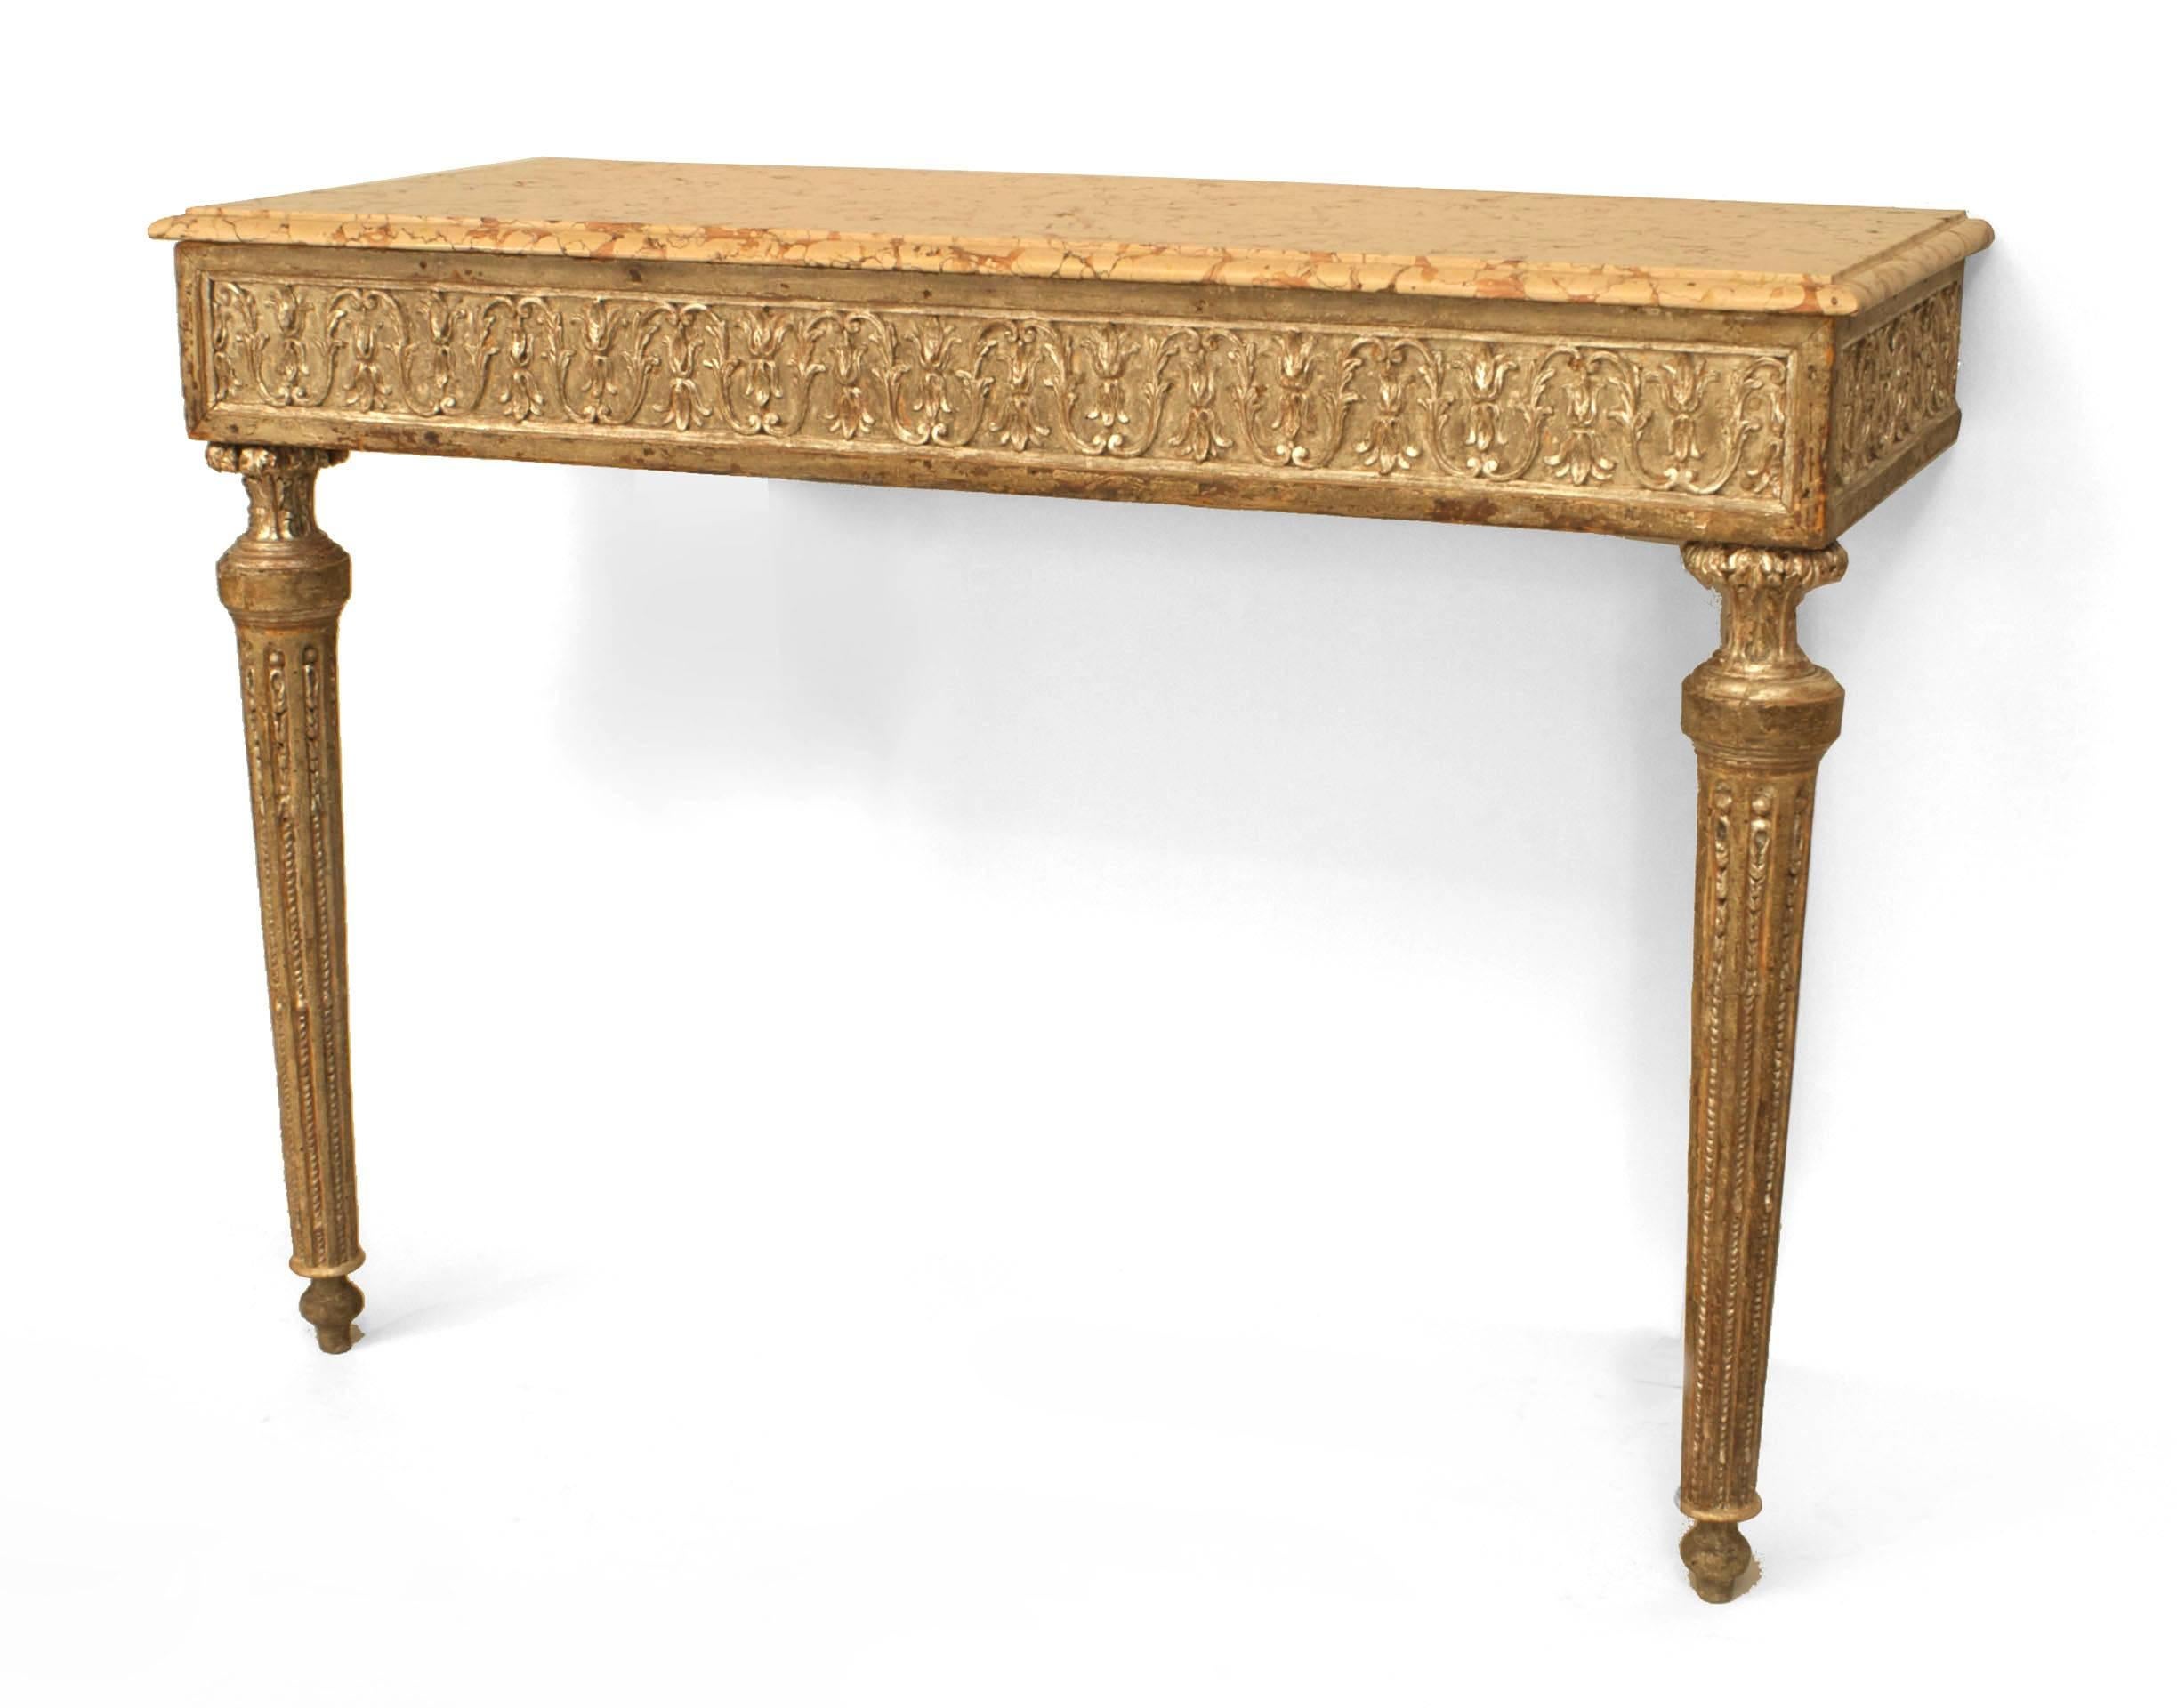 Pair of Italian Neo-classic (18th Century) silver gilt bracket form console tables with 2 round fluted tapered front legs and a carved apron supporting rectangular marble tops. (PRICED AS Pair)
